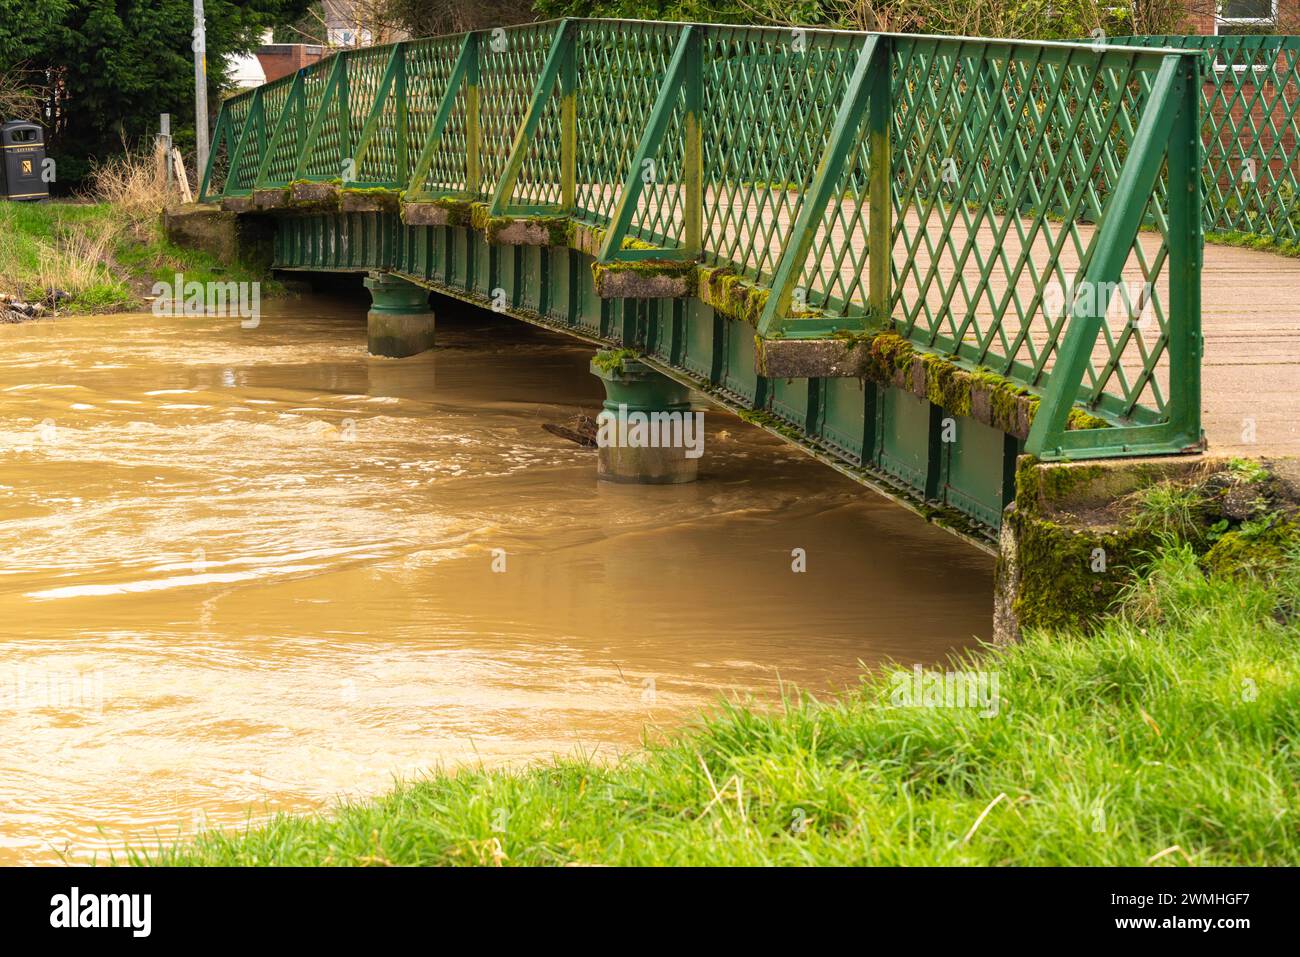 River Witham, bridge, Boultham Park, link Russell Street, Newark Road, in flood, brown waters, fast current, structure under pressure, green cast iron Stock Photo